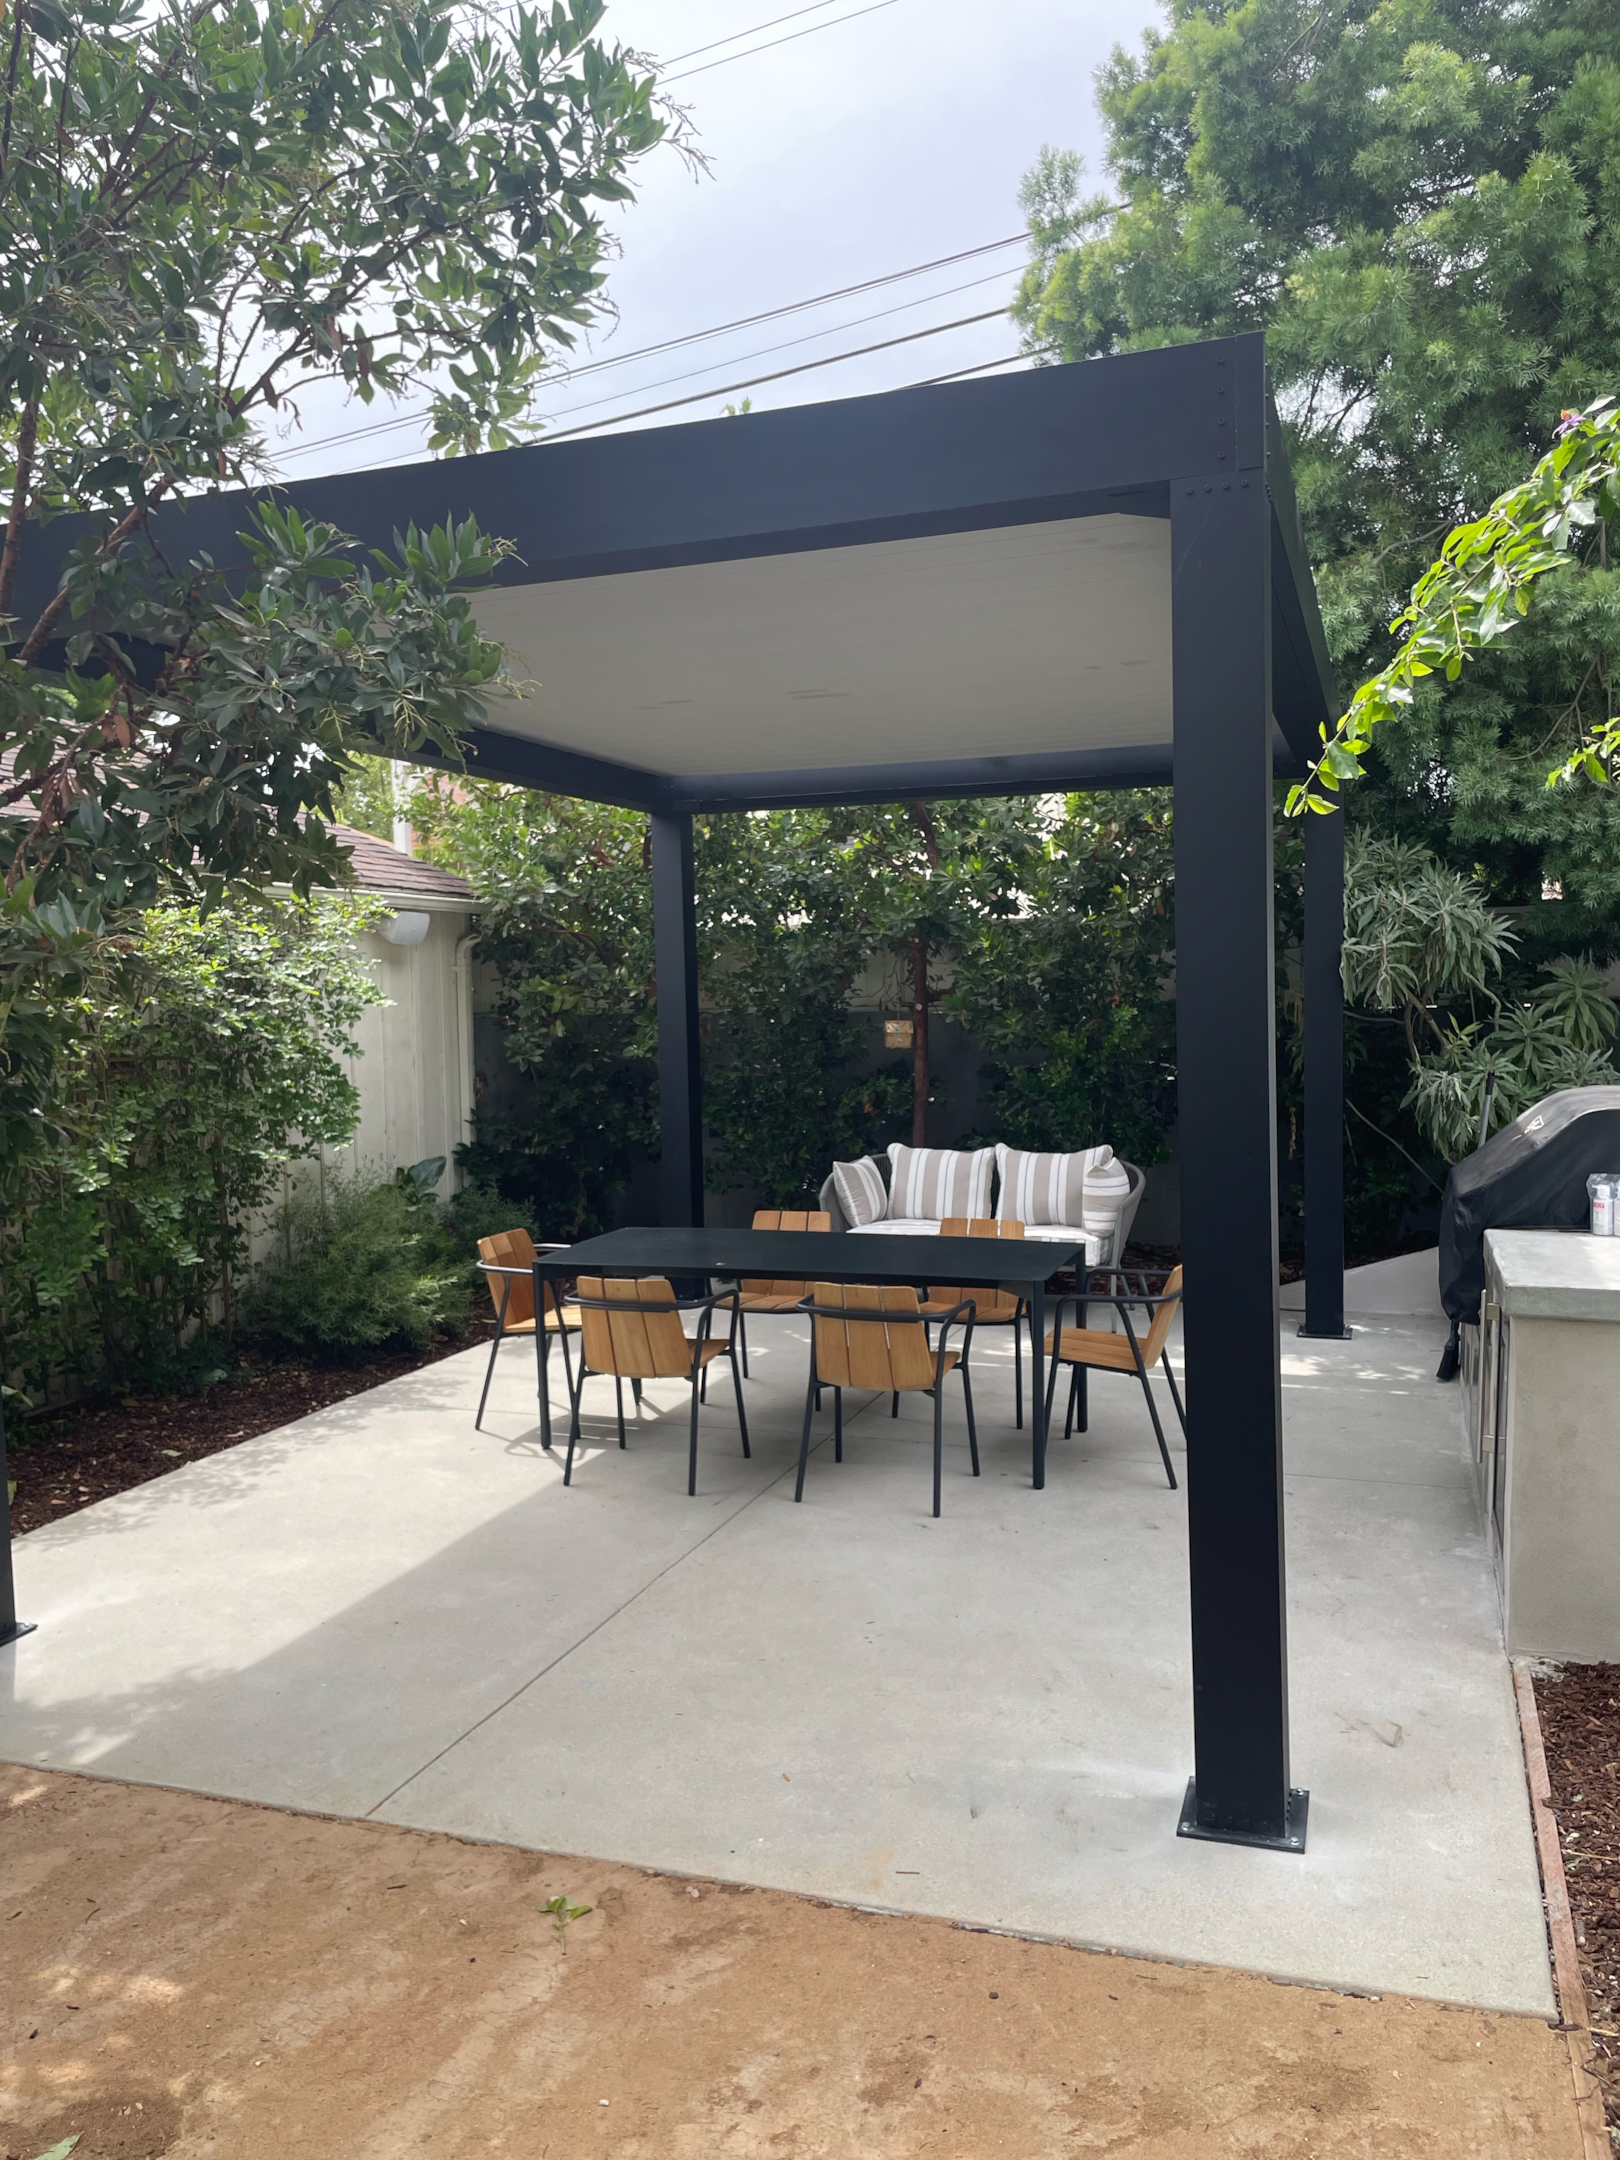 Outdoor area with dining table and complete shade